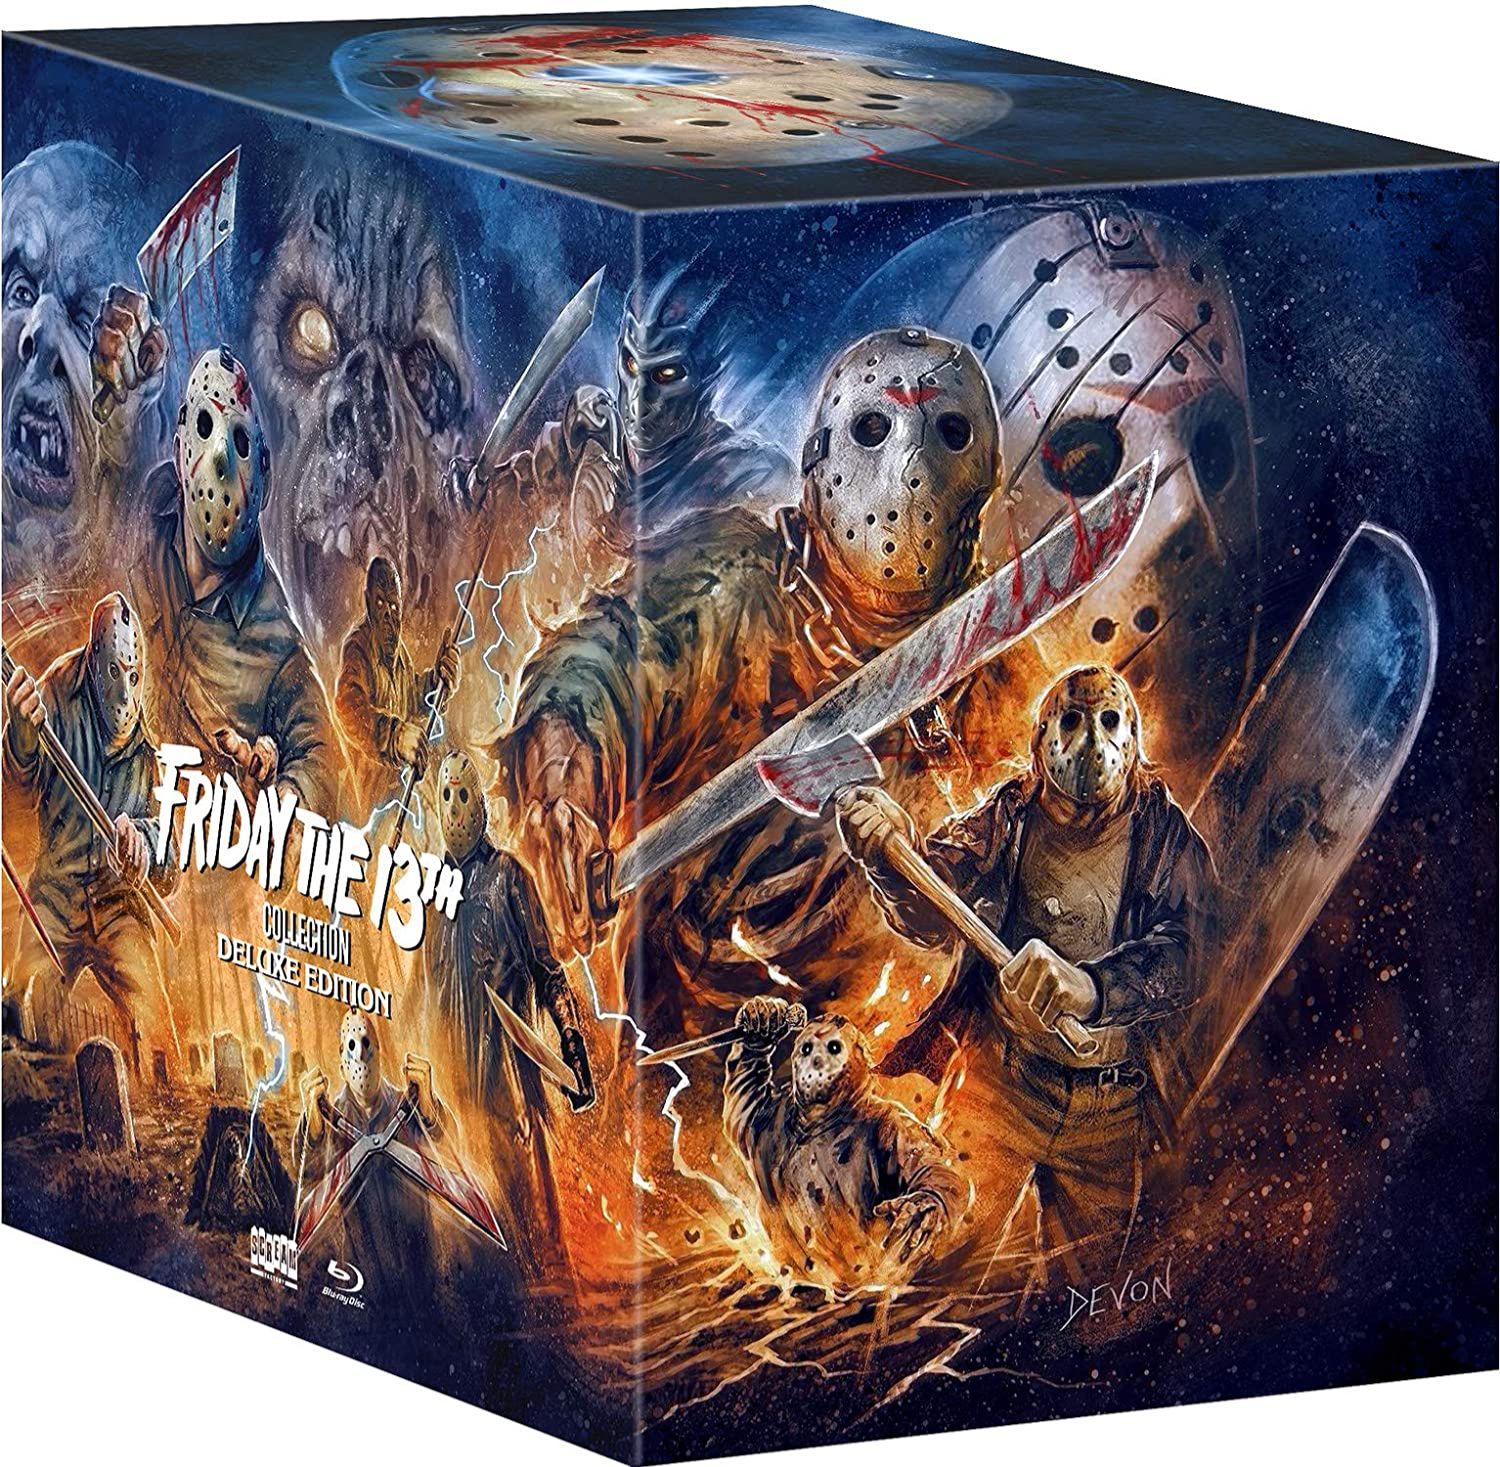 Friday the 13th Collection - Scream Factory